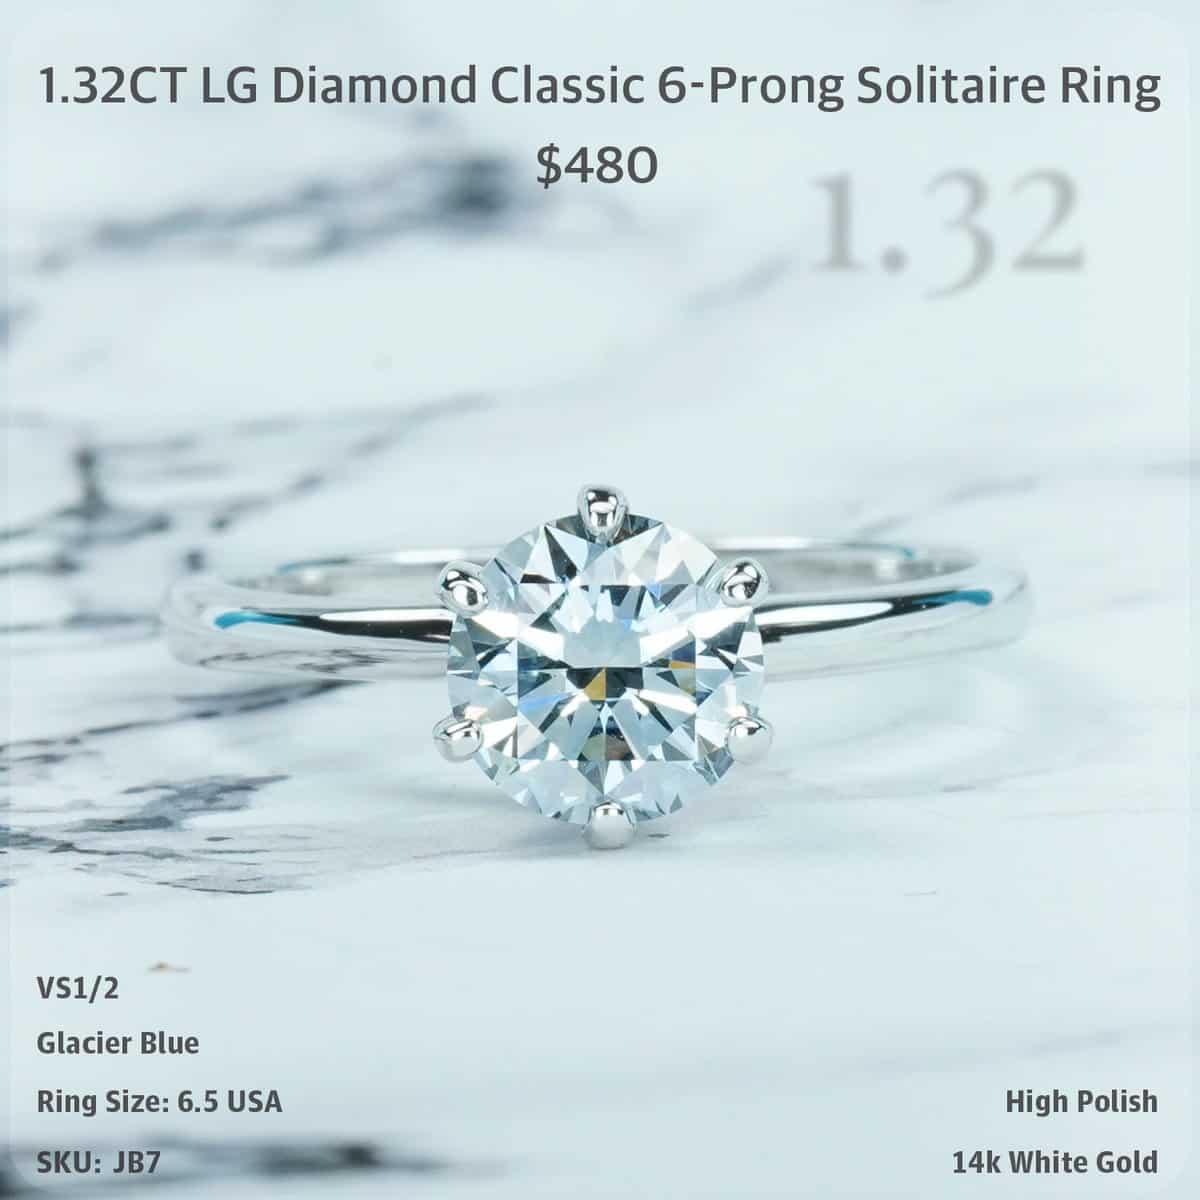 1.32CT LG Diamond Classic 6-Prong Solitaire Ring